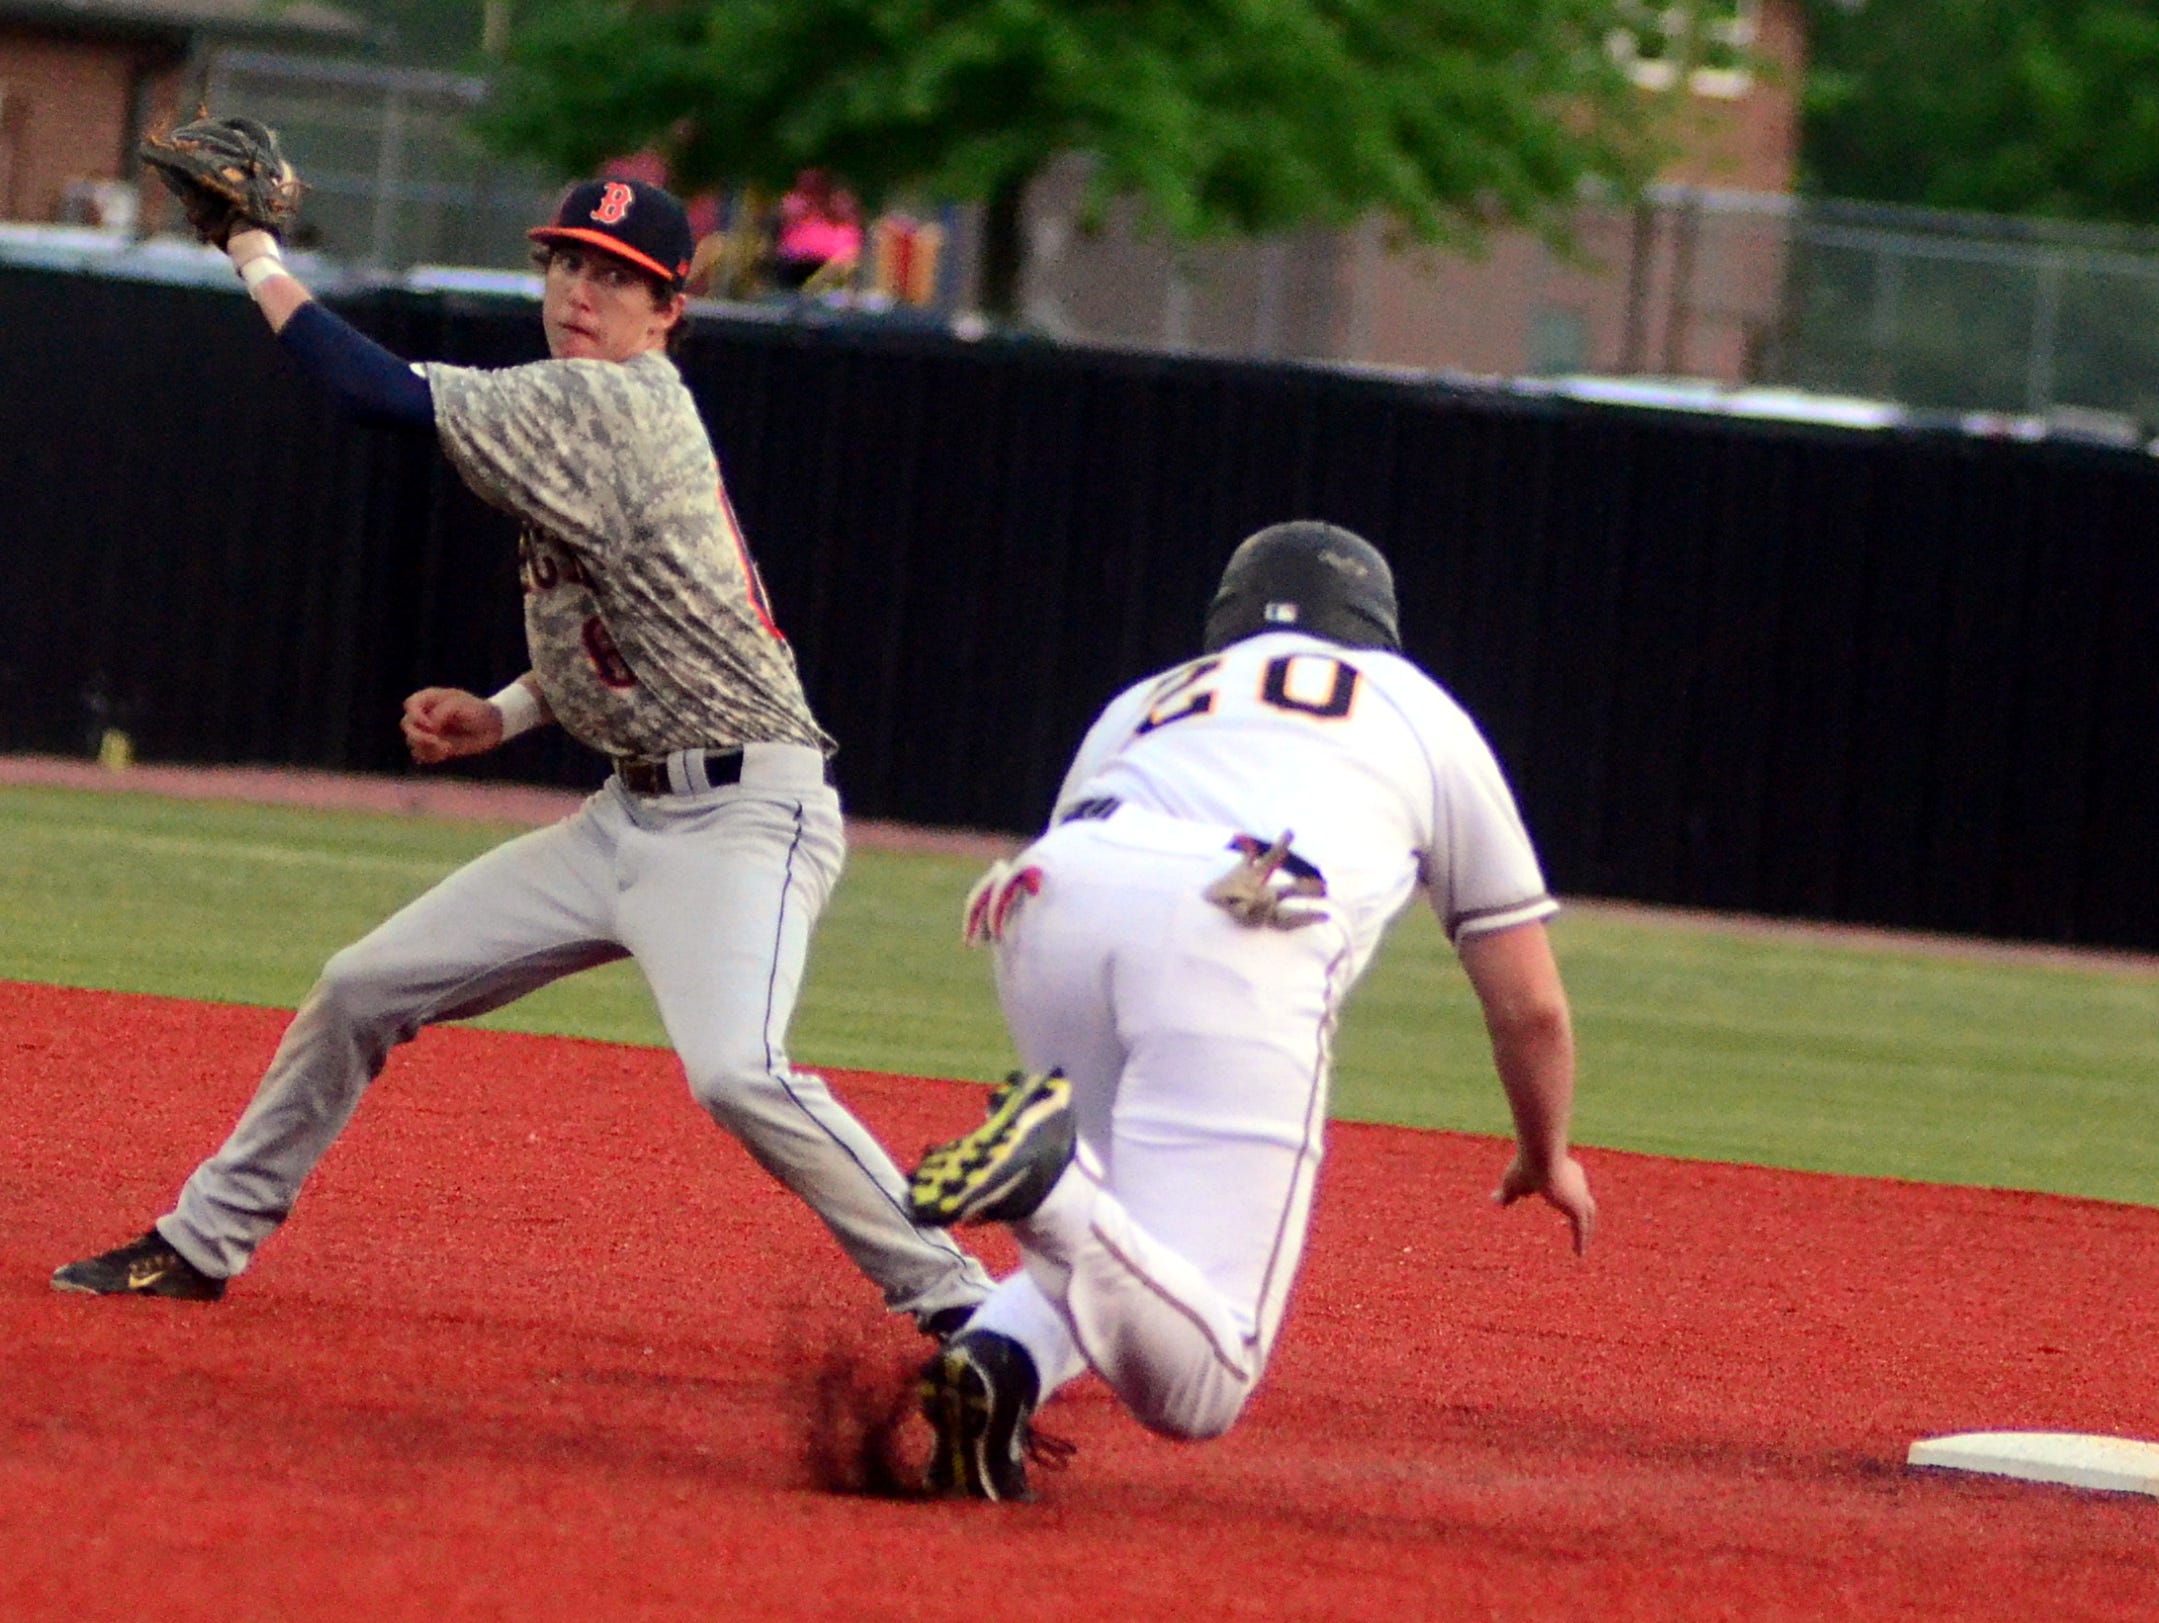 Beech High senior shortstop Tyler Maskill receives a throw as Hendersonville senior Grant Williams steals second base during first-inning action.